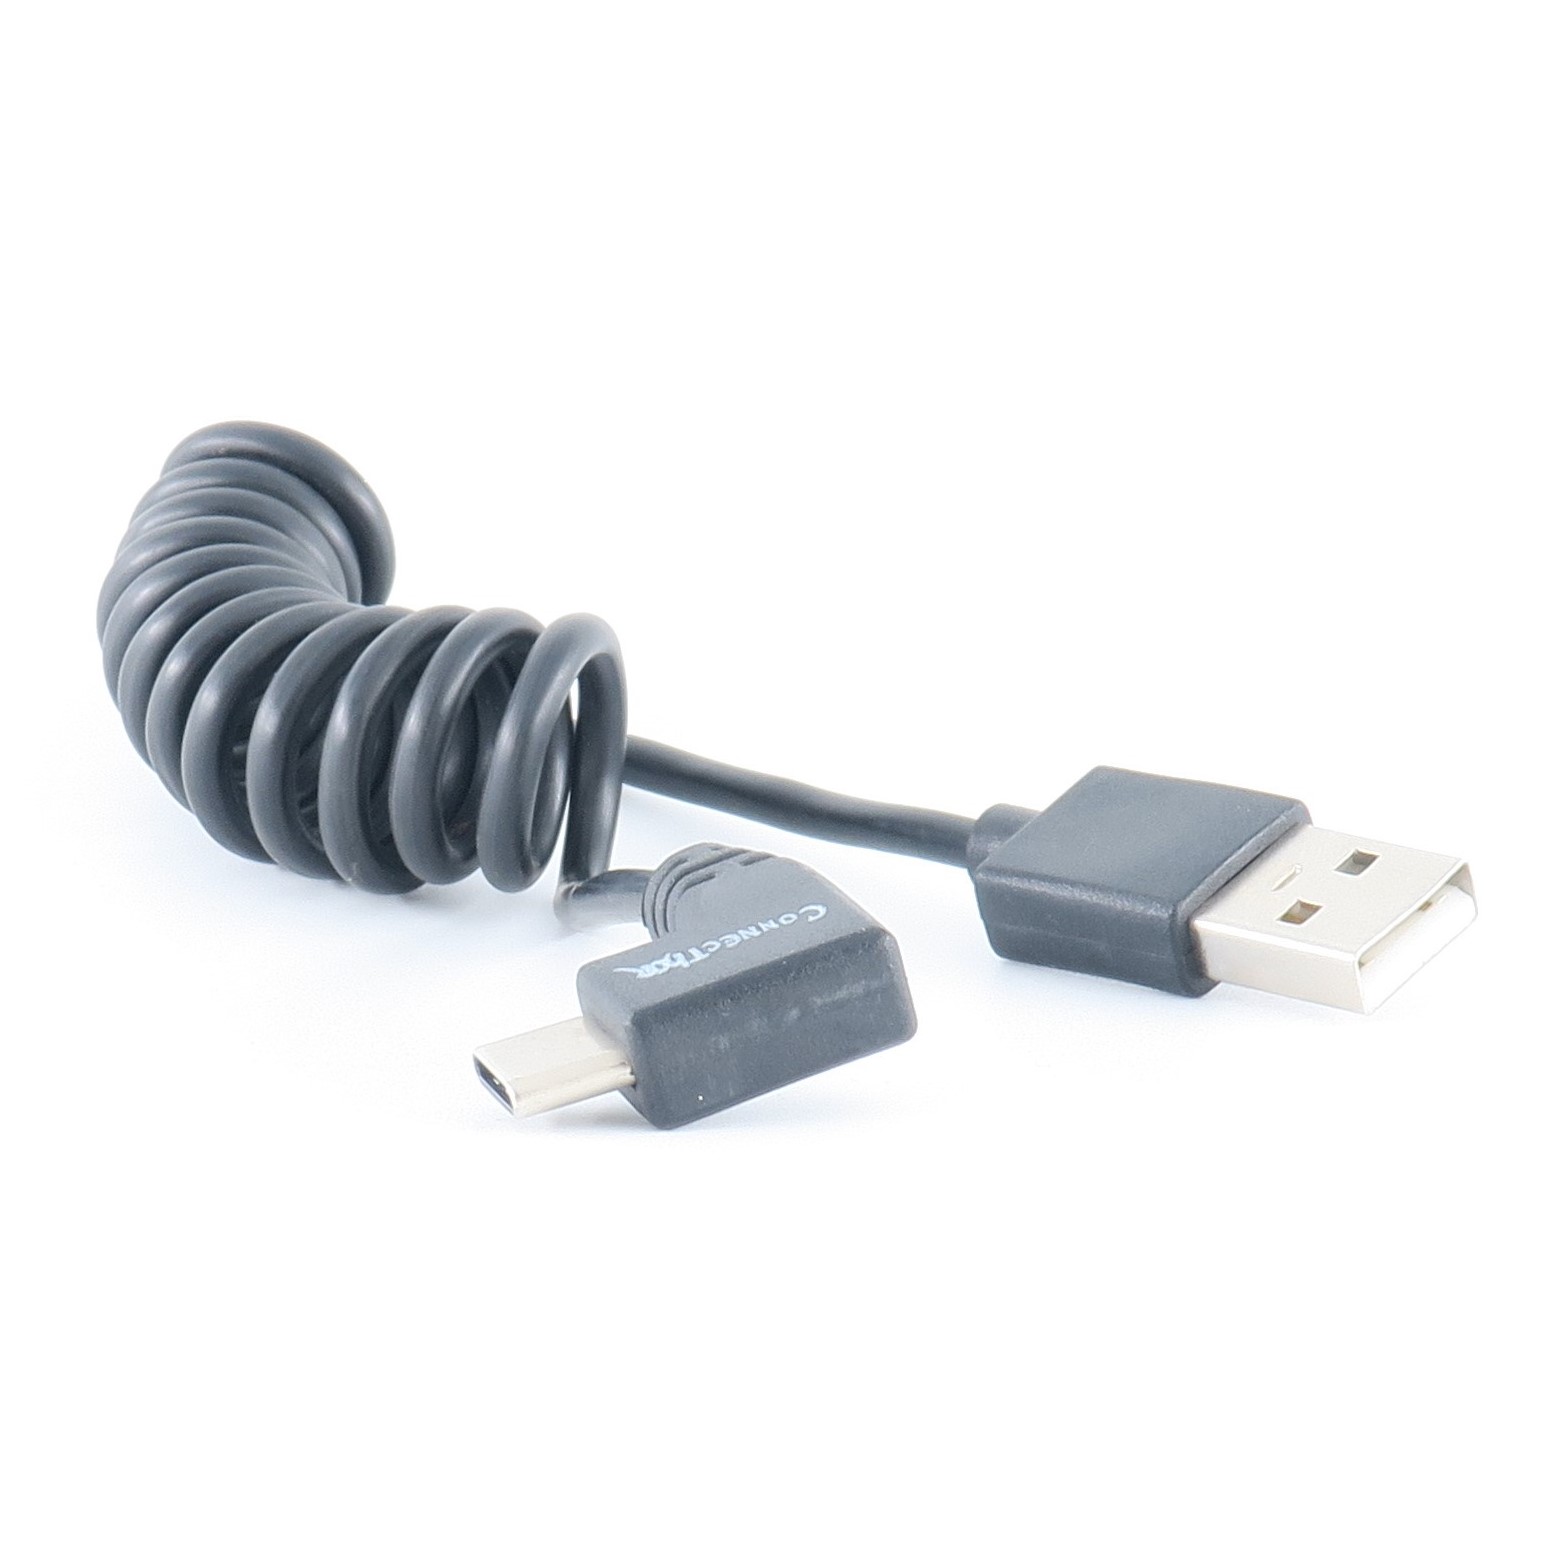 ConnecThor cable - USB 2.0 to type C for DJI Drones